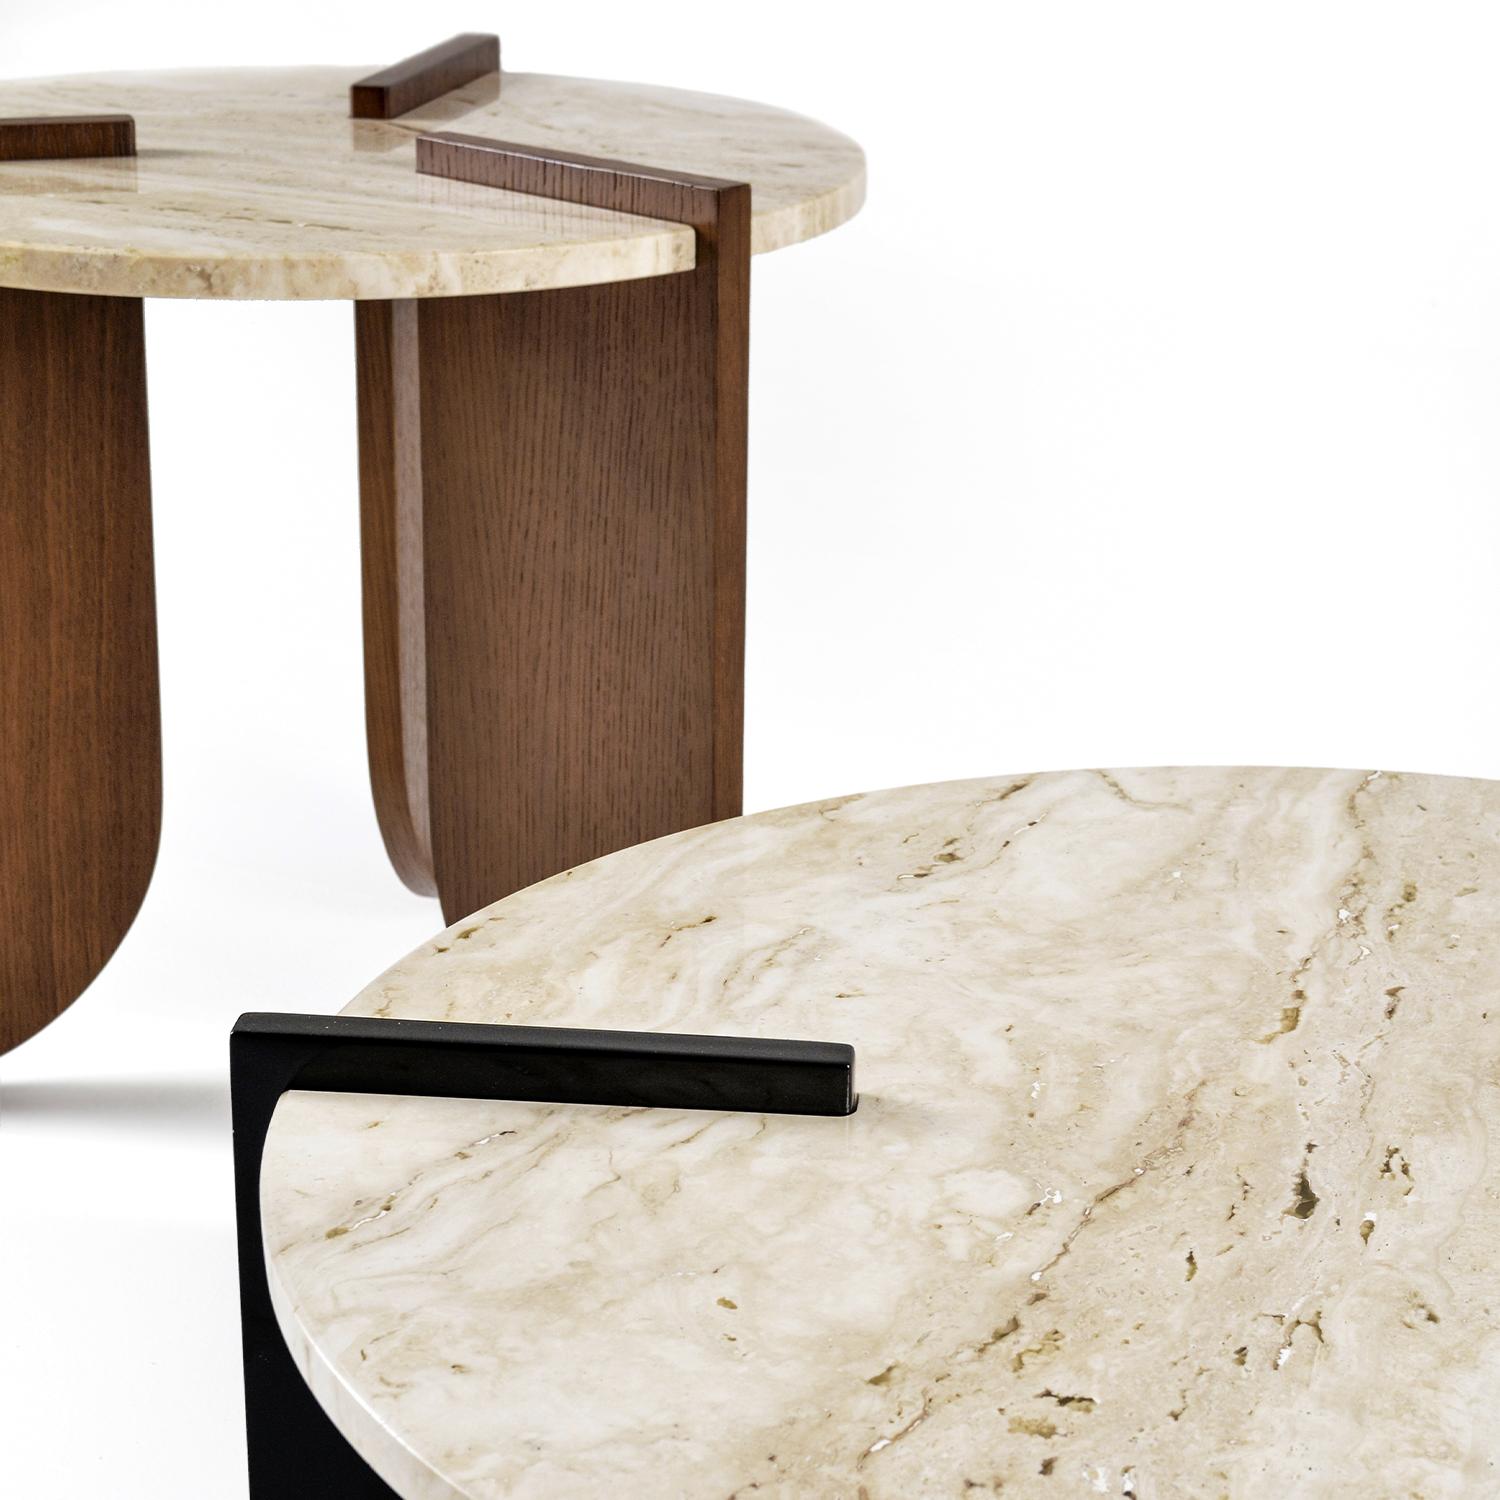 Hand-Crafted Jean Side Table, Lacquered Mdf Legs, Polished Travertine Marble Top For Sale